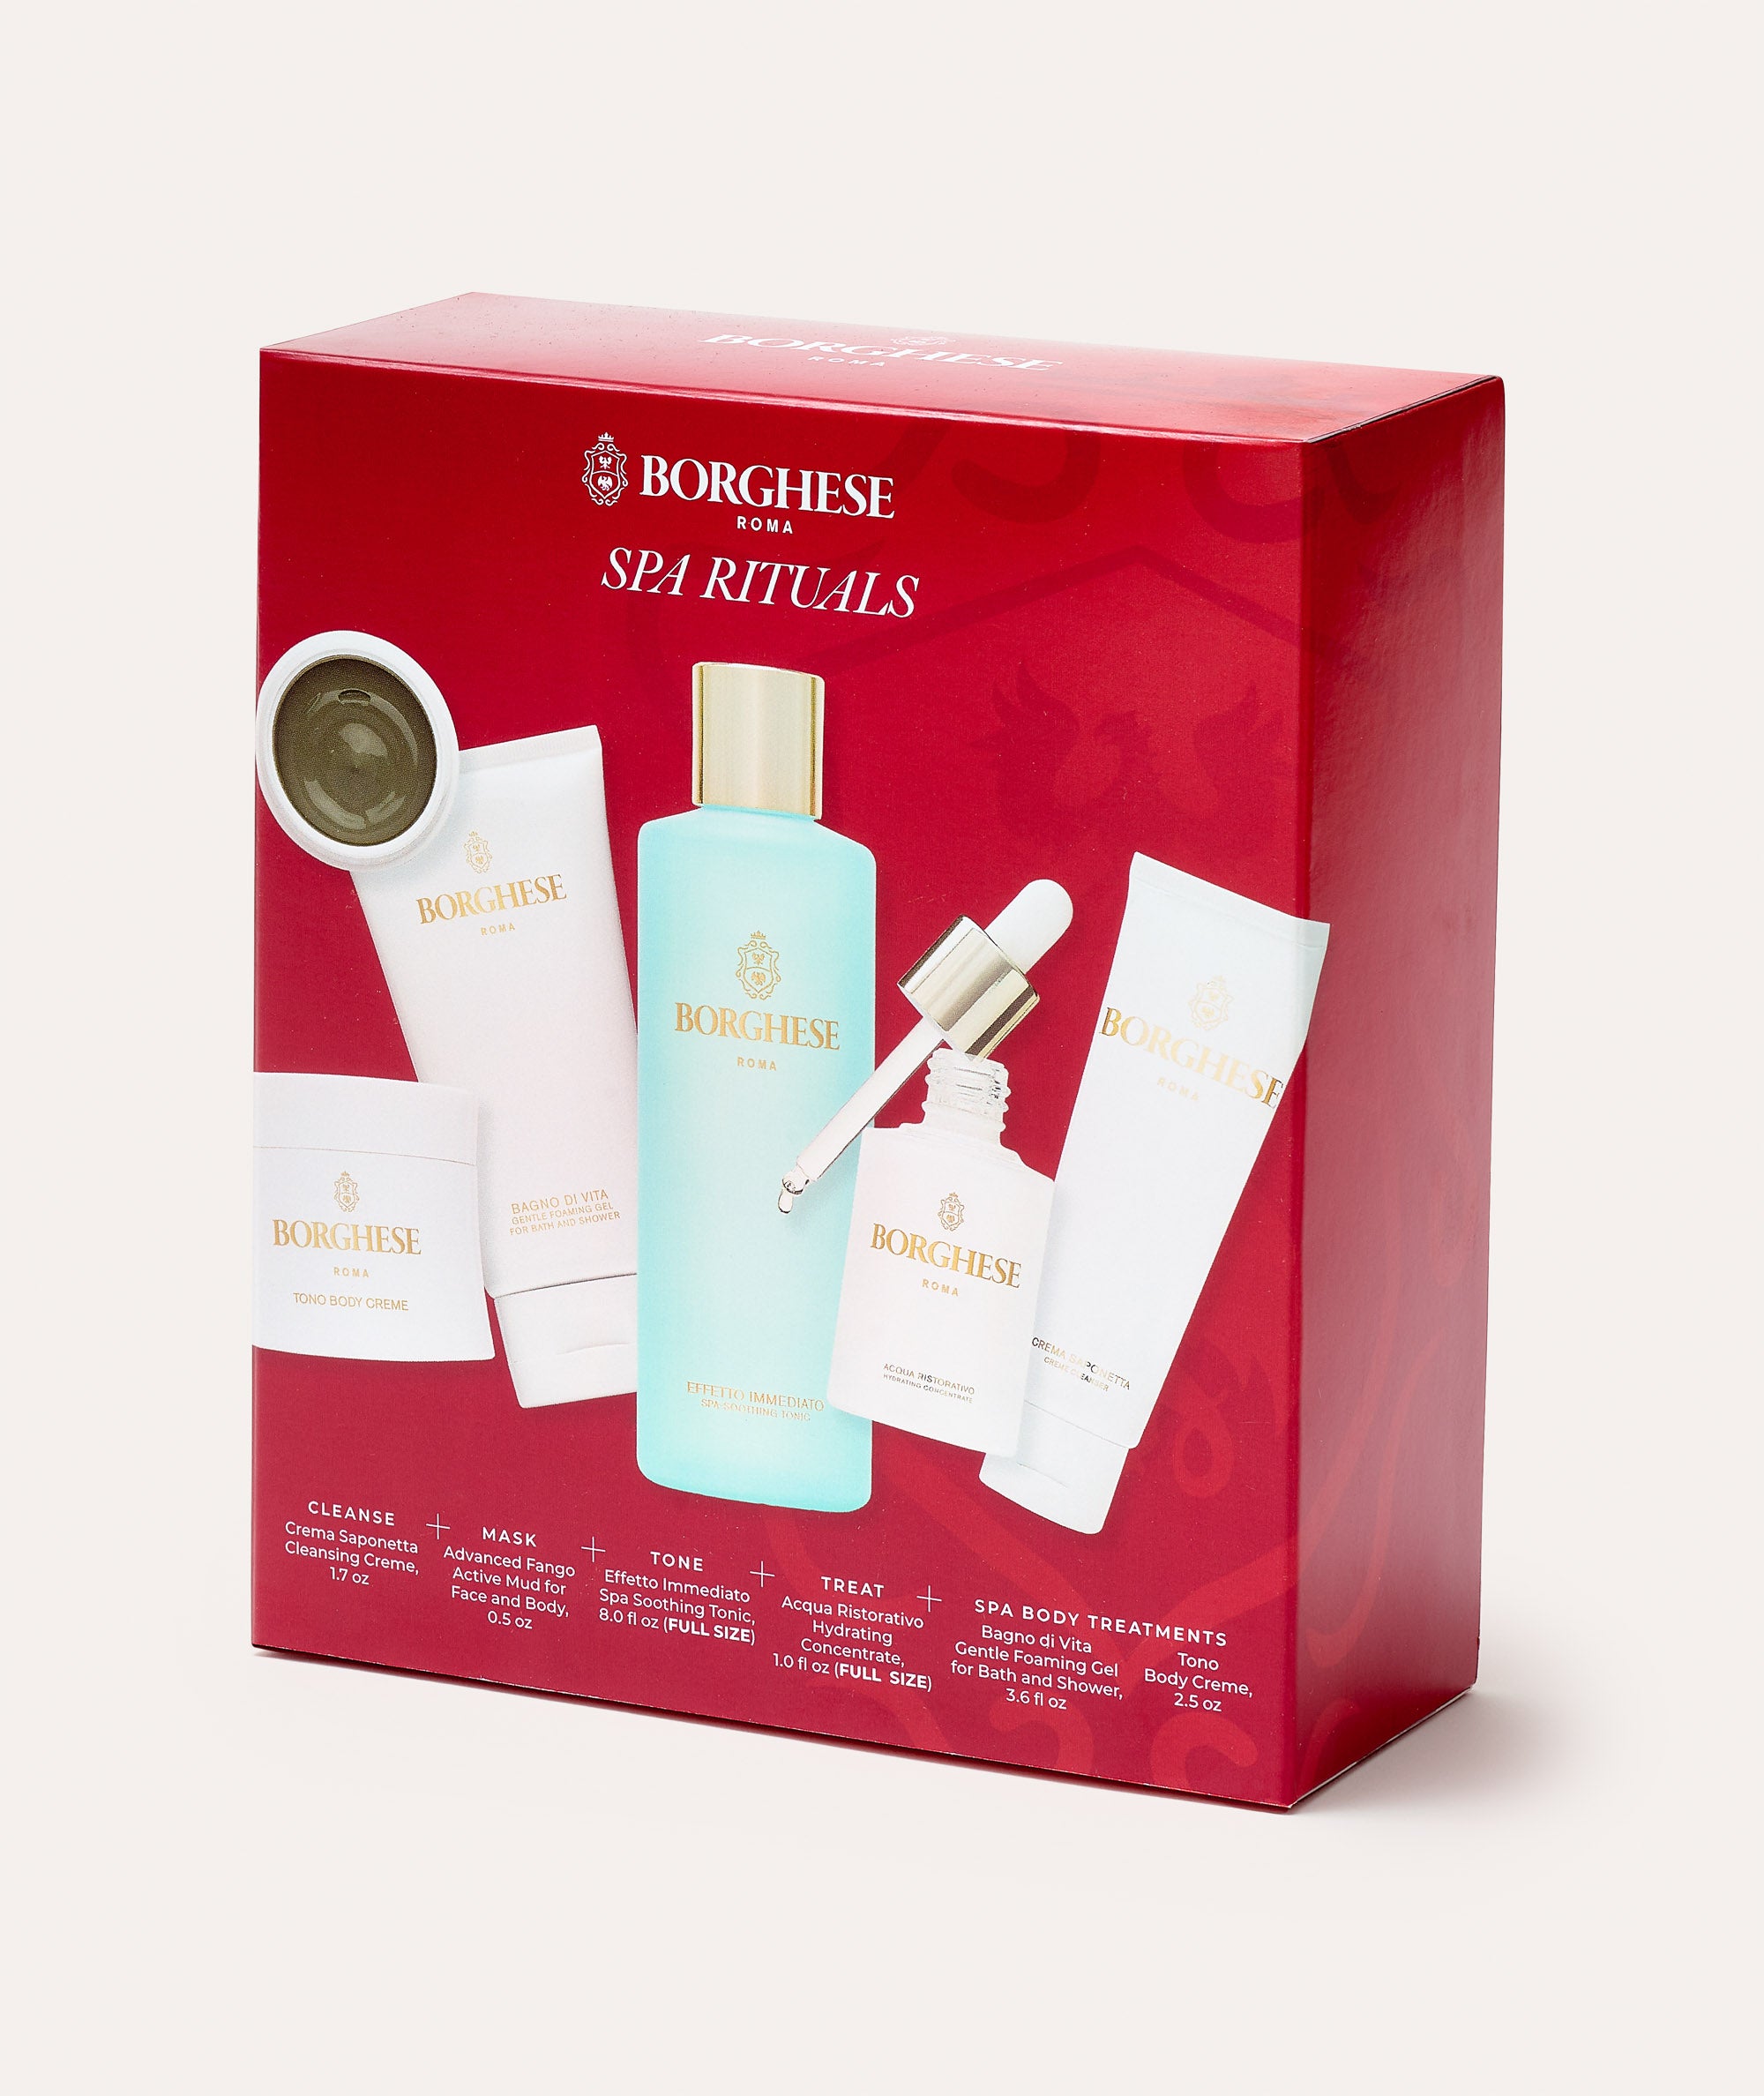 The Borghese 6-Piece Spa Rituals Gift Set red box